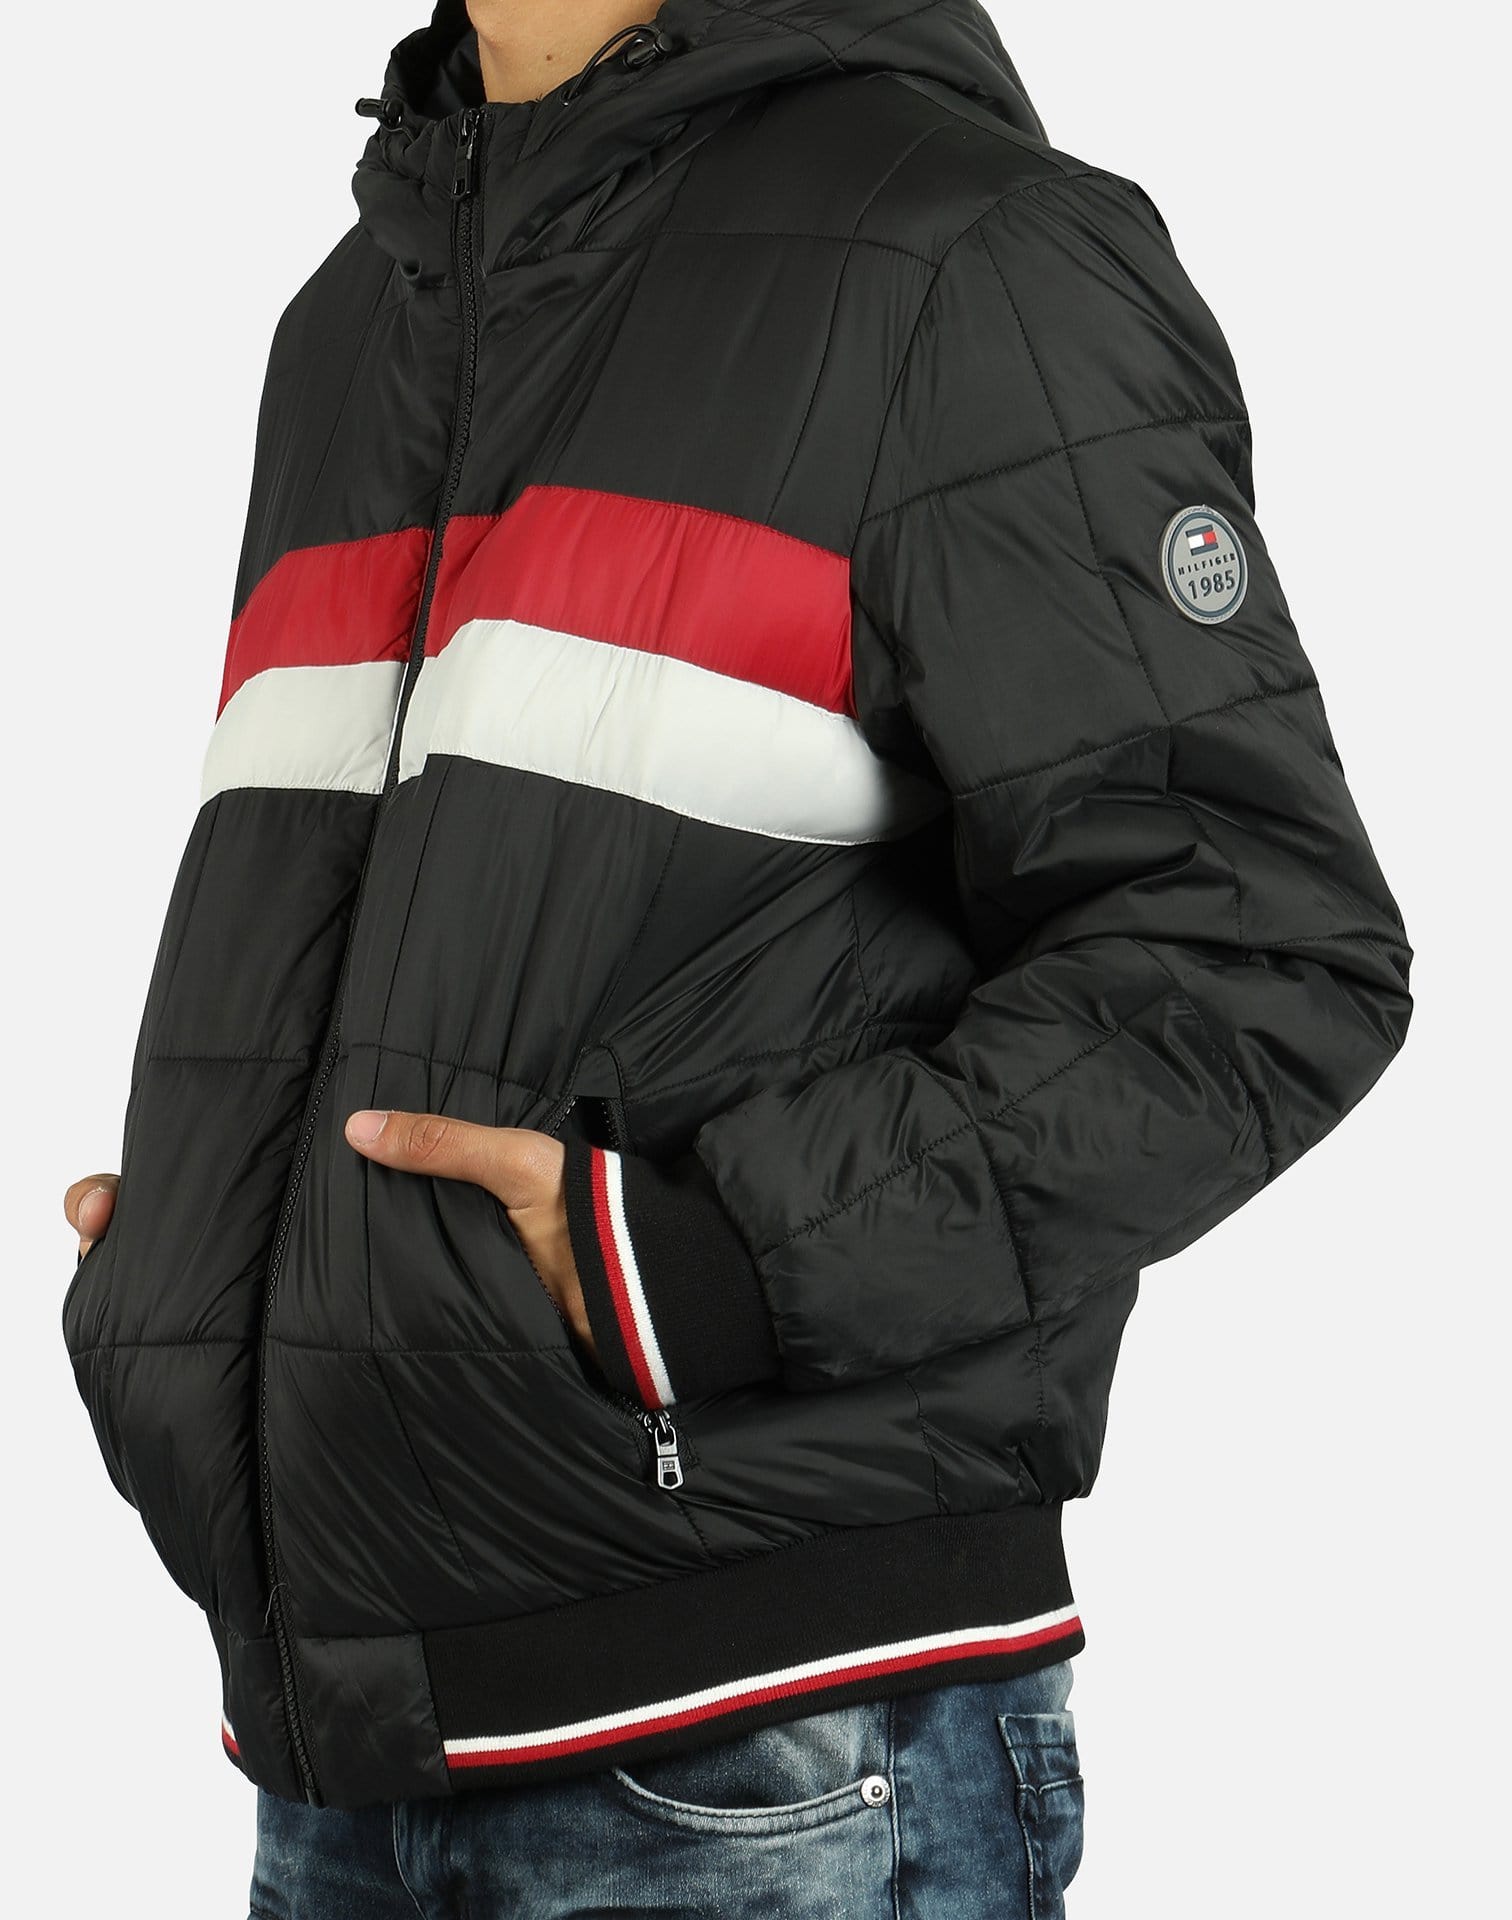 tommy hilfiger colorblock puffer jacket